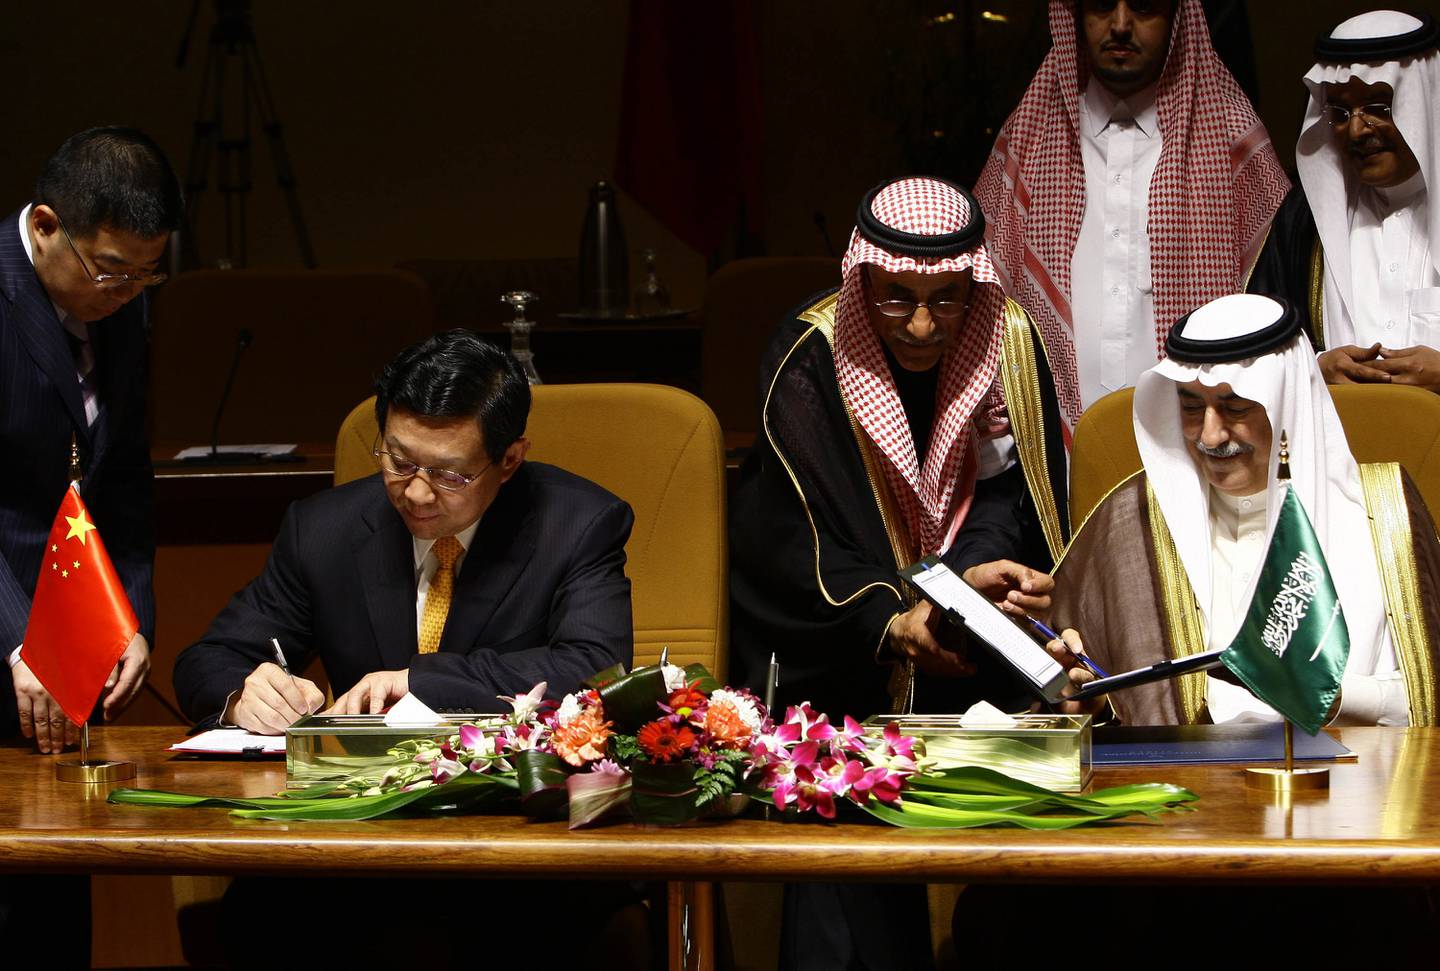 Saudi Arabia is one of China's largest foreign investment recipients. Reuters